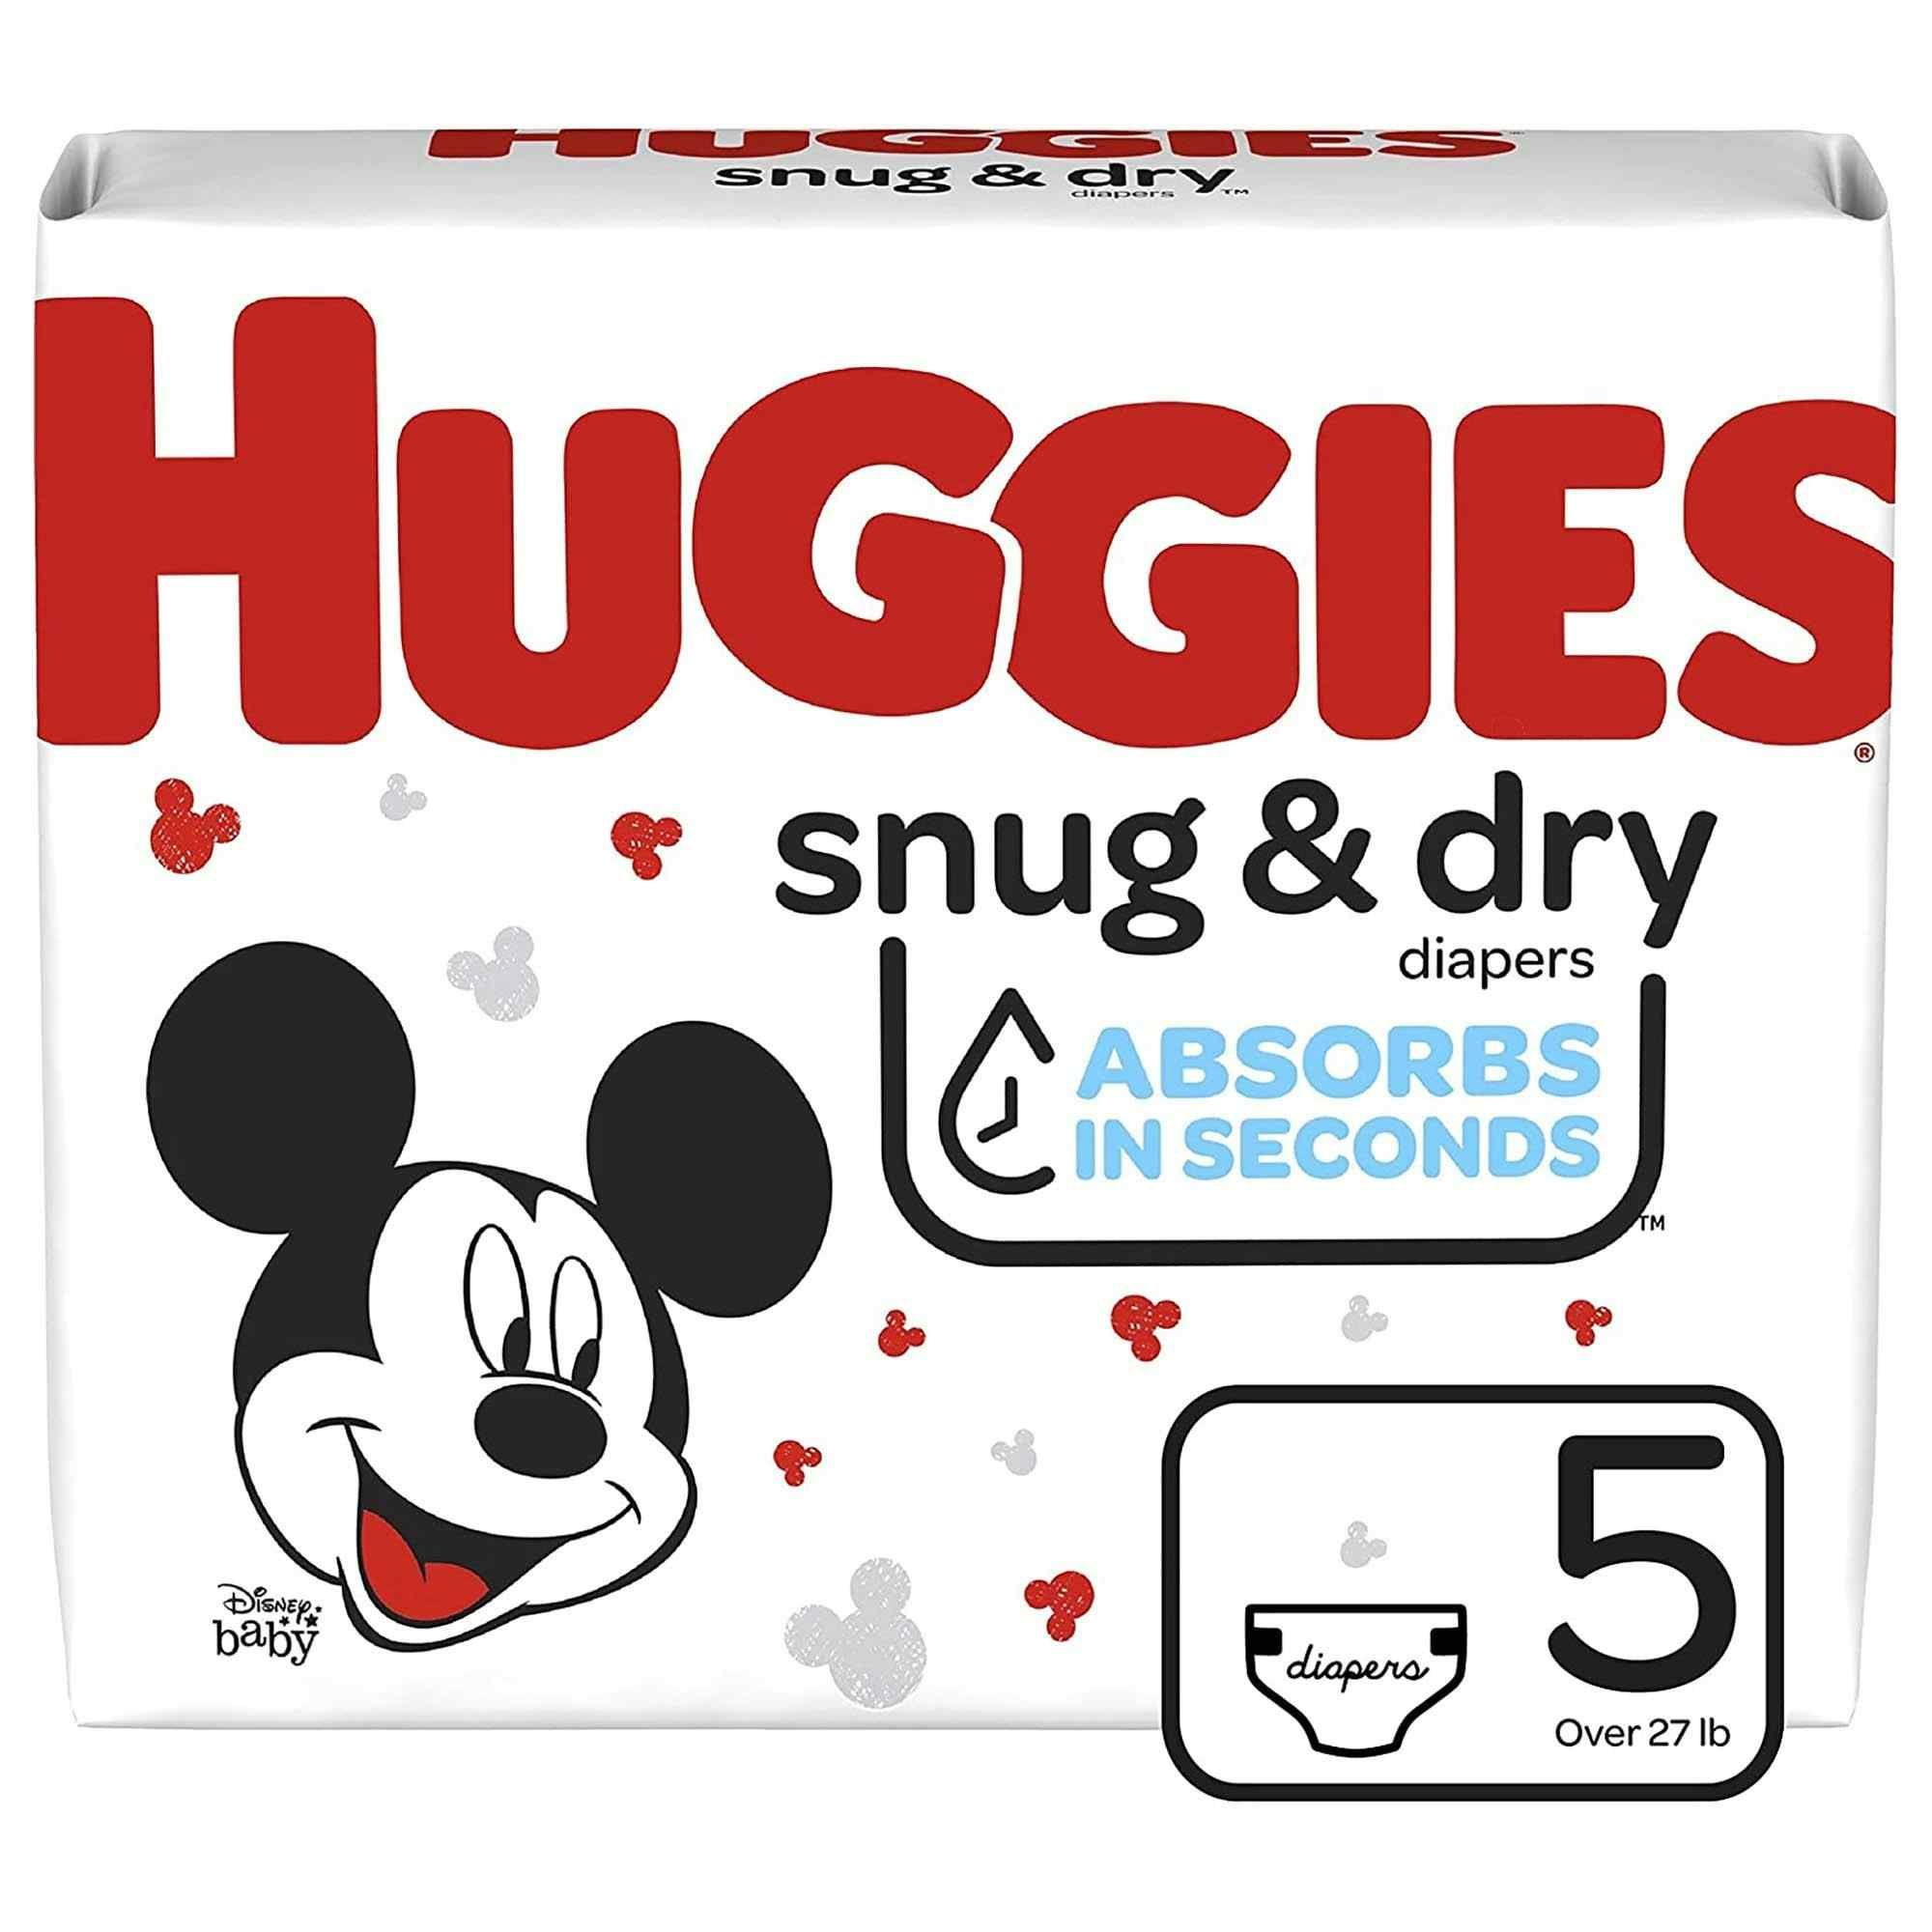 Huggies Snug & Dry Baby Diapers with Tabs, Heavy Absorbency, 51473, Size 5 (Over 27 lbs.) - Pack of 22